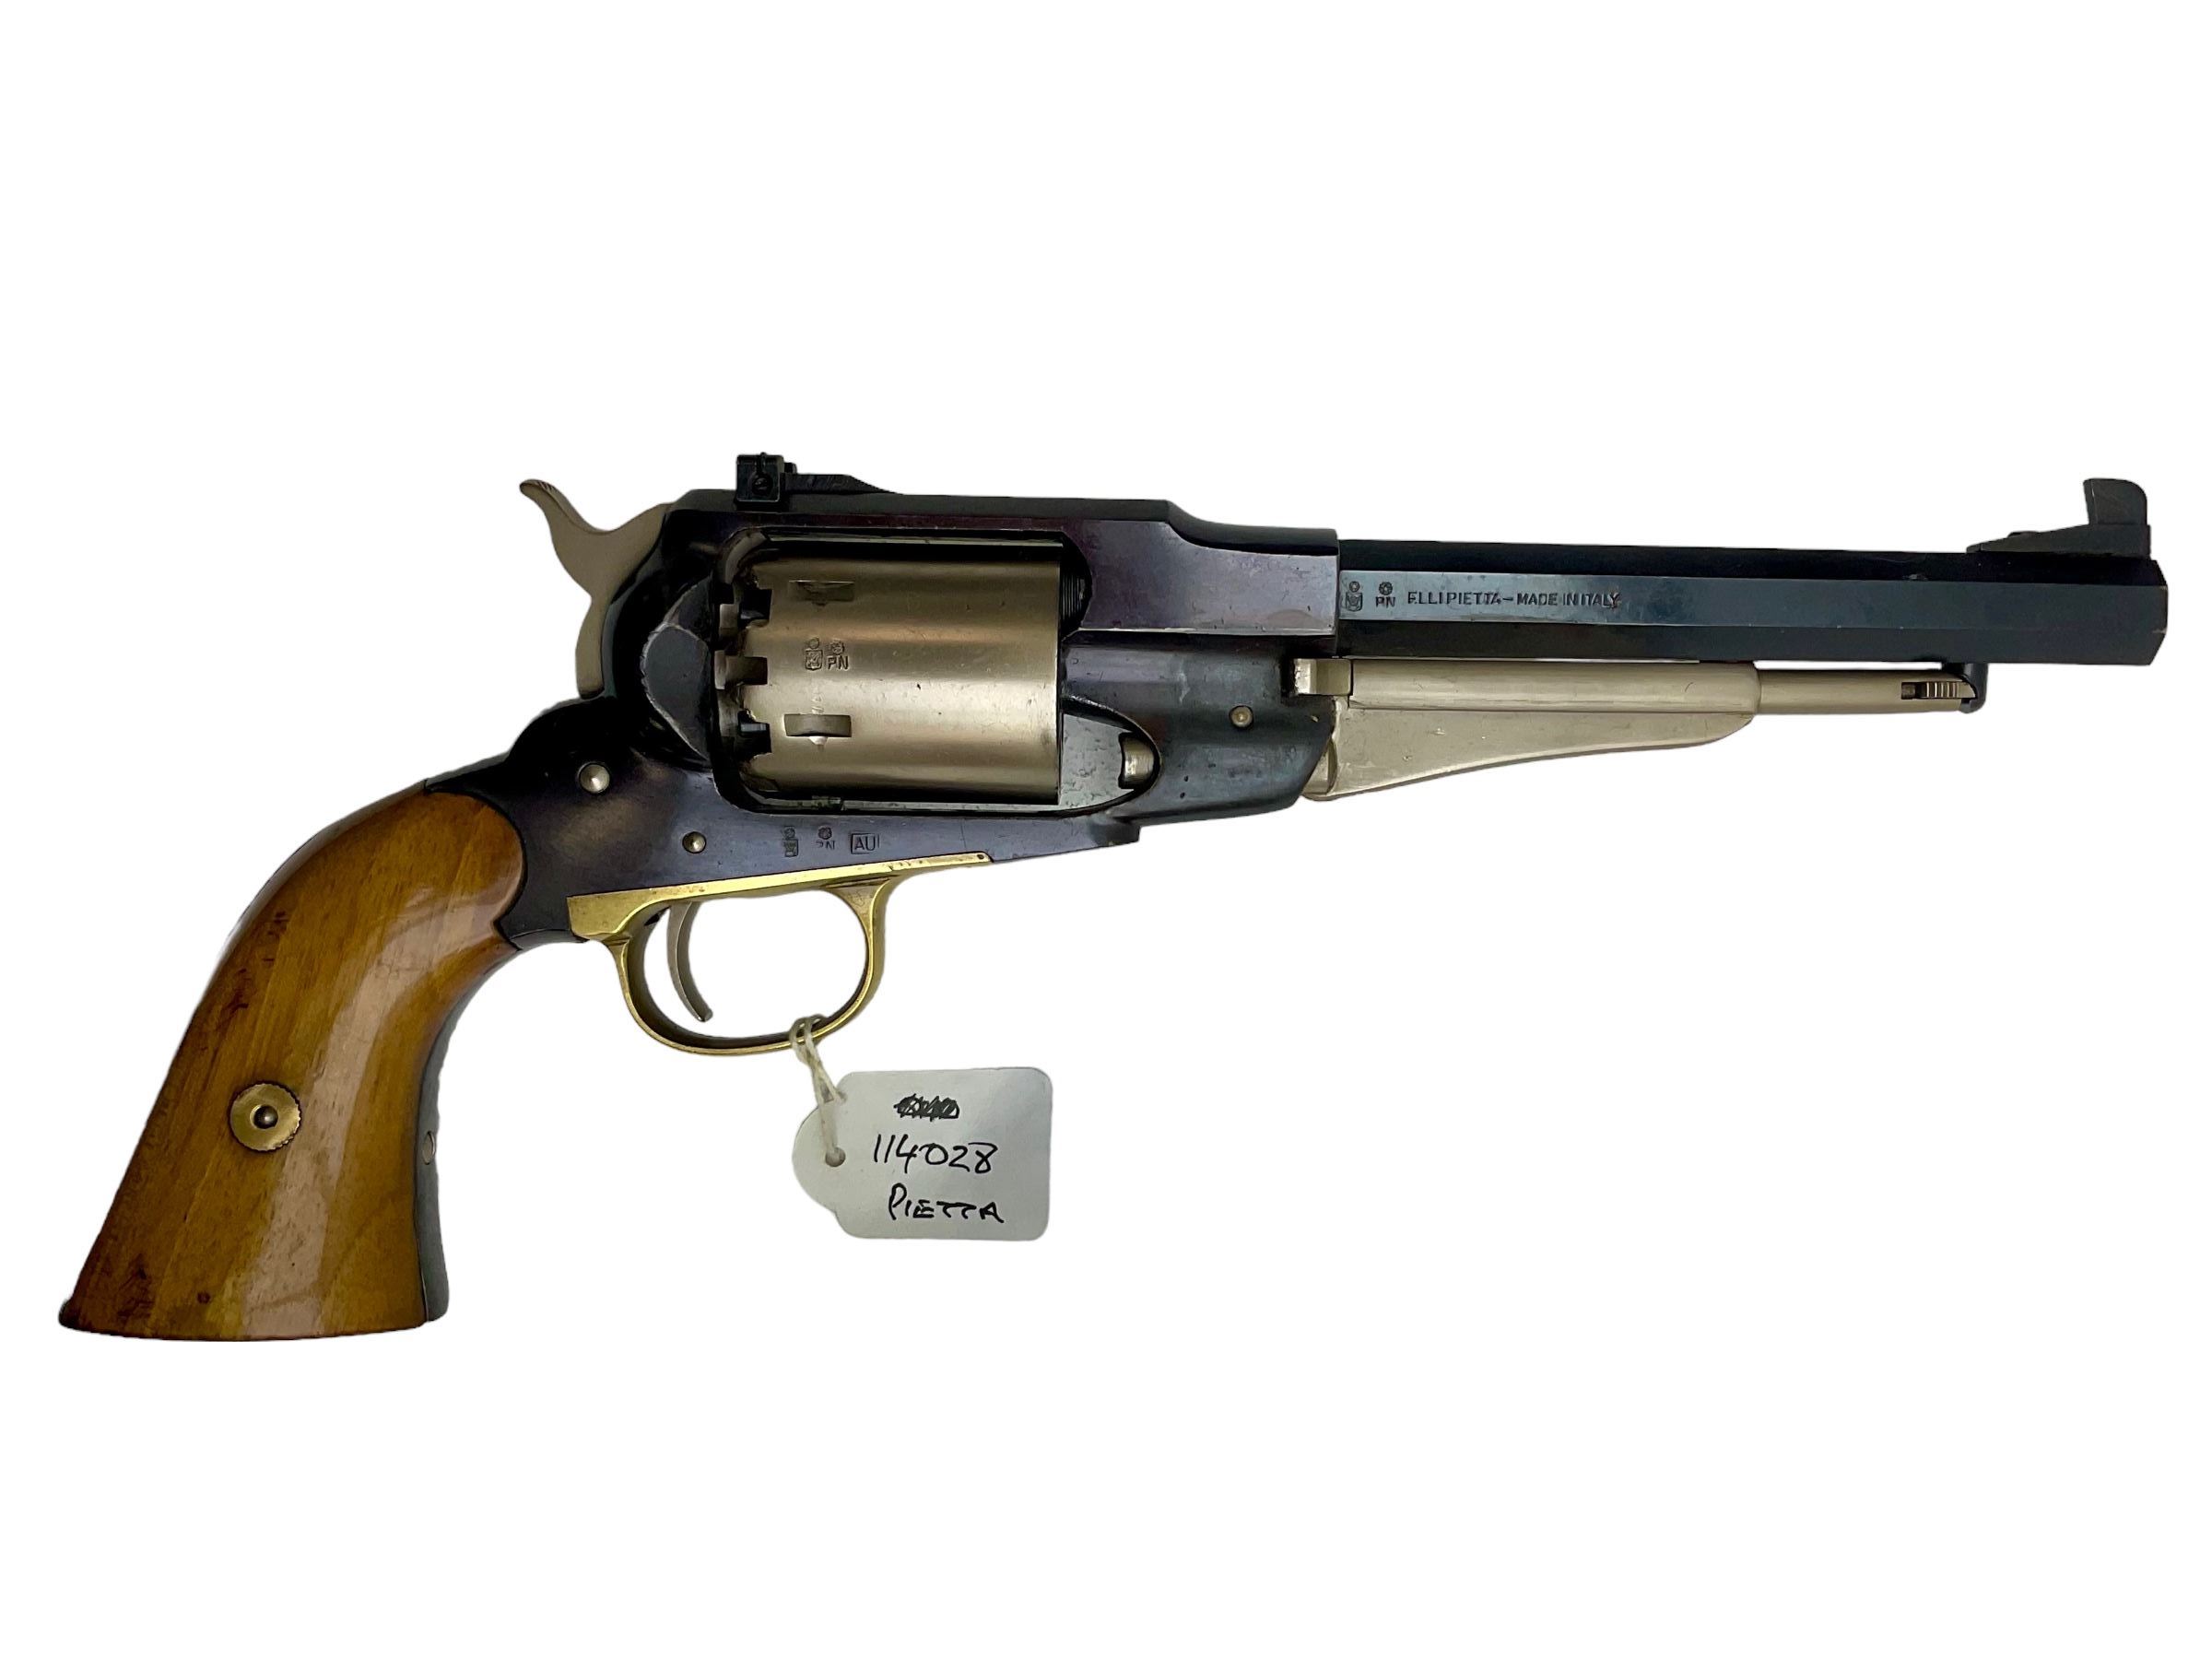 SECTION 1 FIREARMS CERTIFICATE REQUIRED - Pietta 1858 Remington target black powder muzzleloading pi